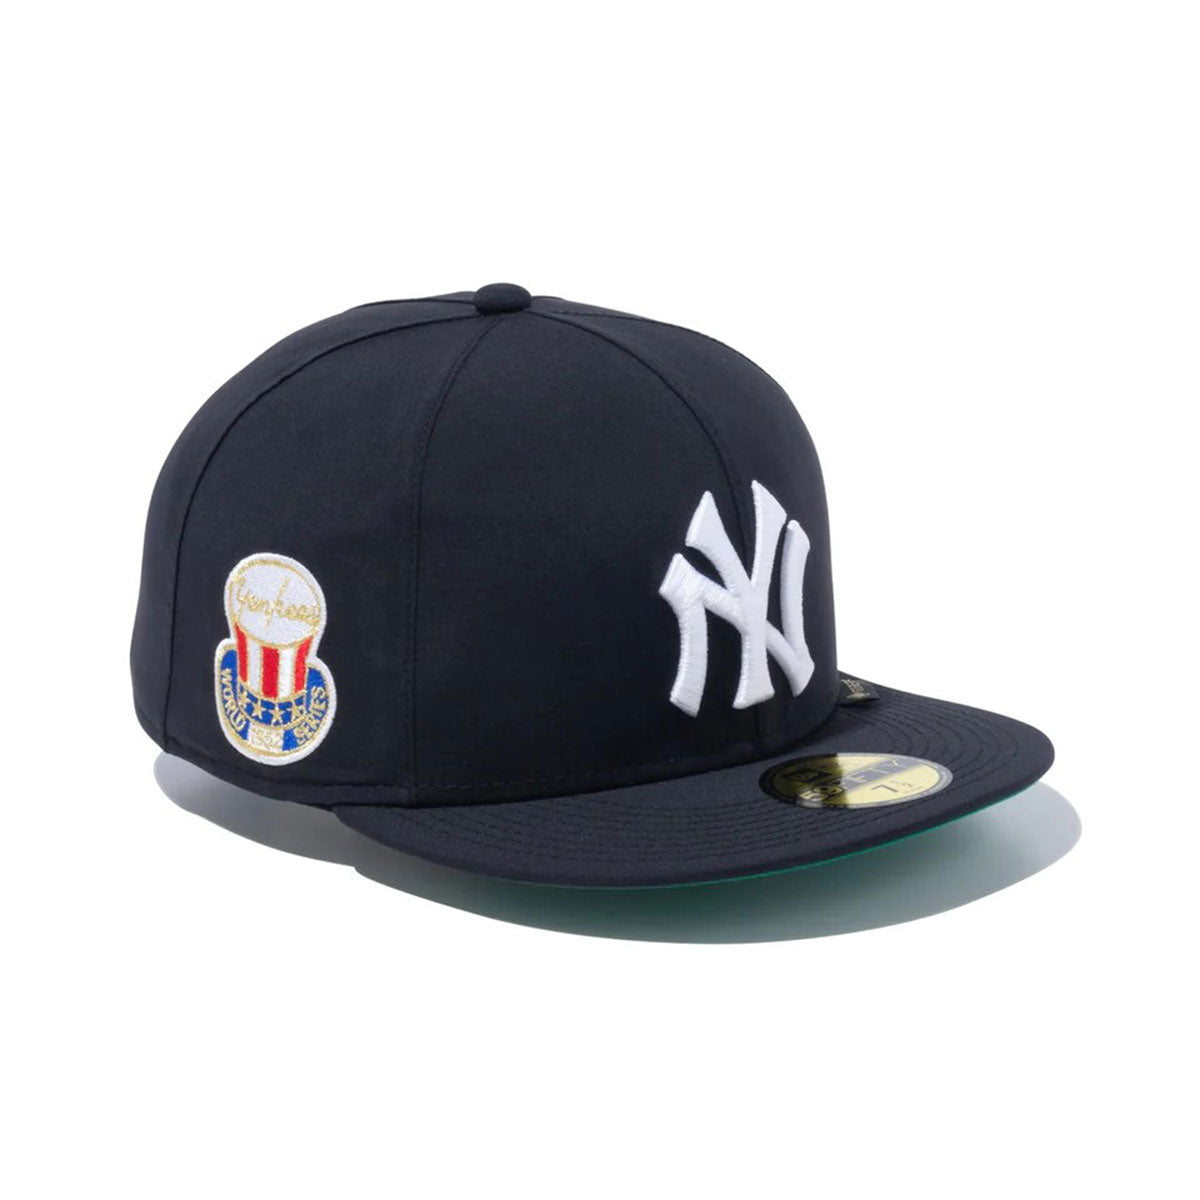 NEW ERA 59FIFTY Fitted Cap New York Yankees GORE-TEX PACLITE Black 7-8 New  